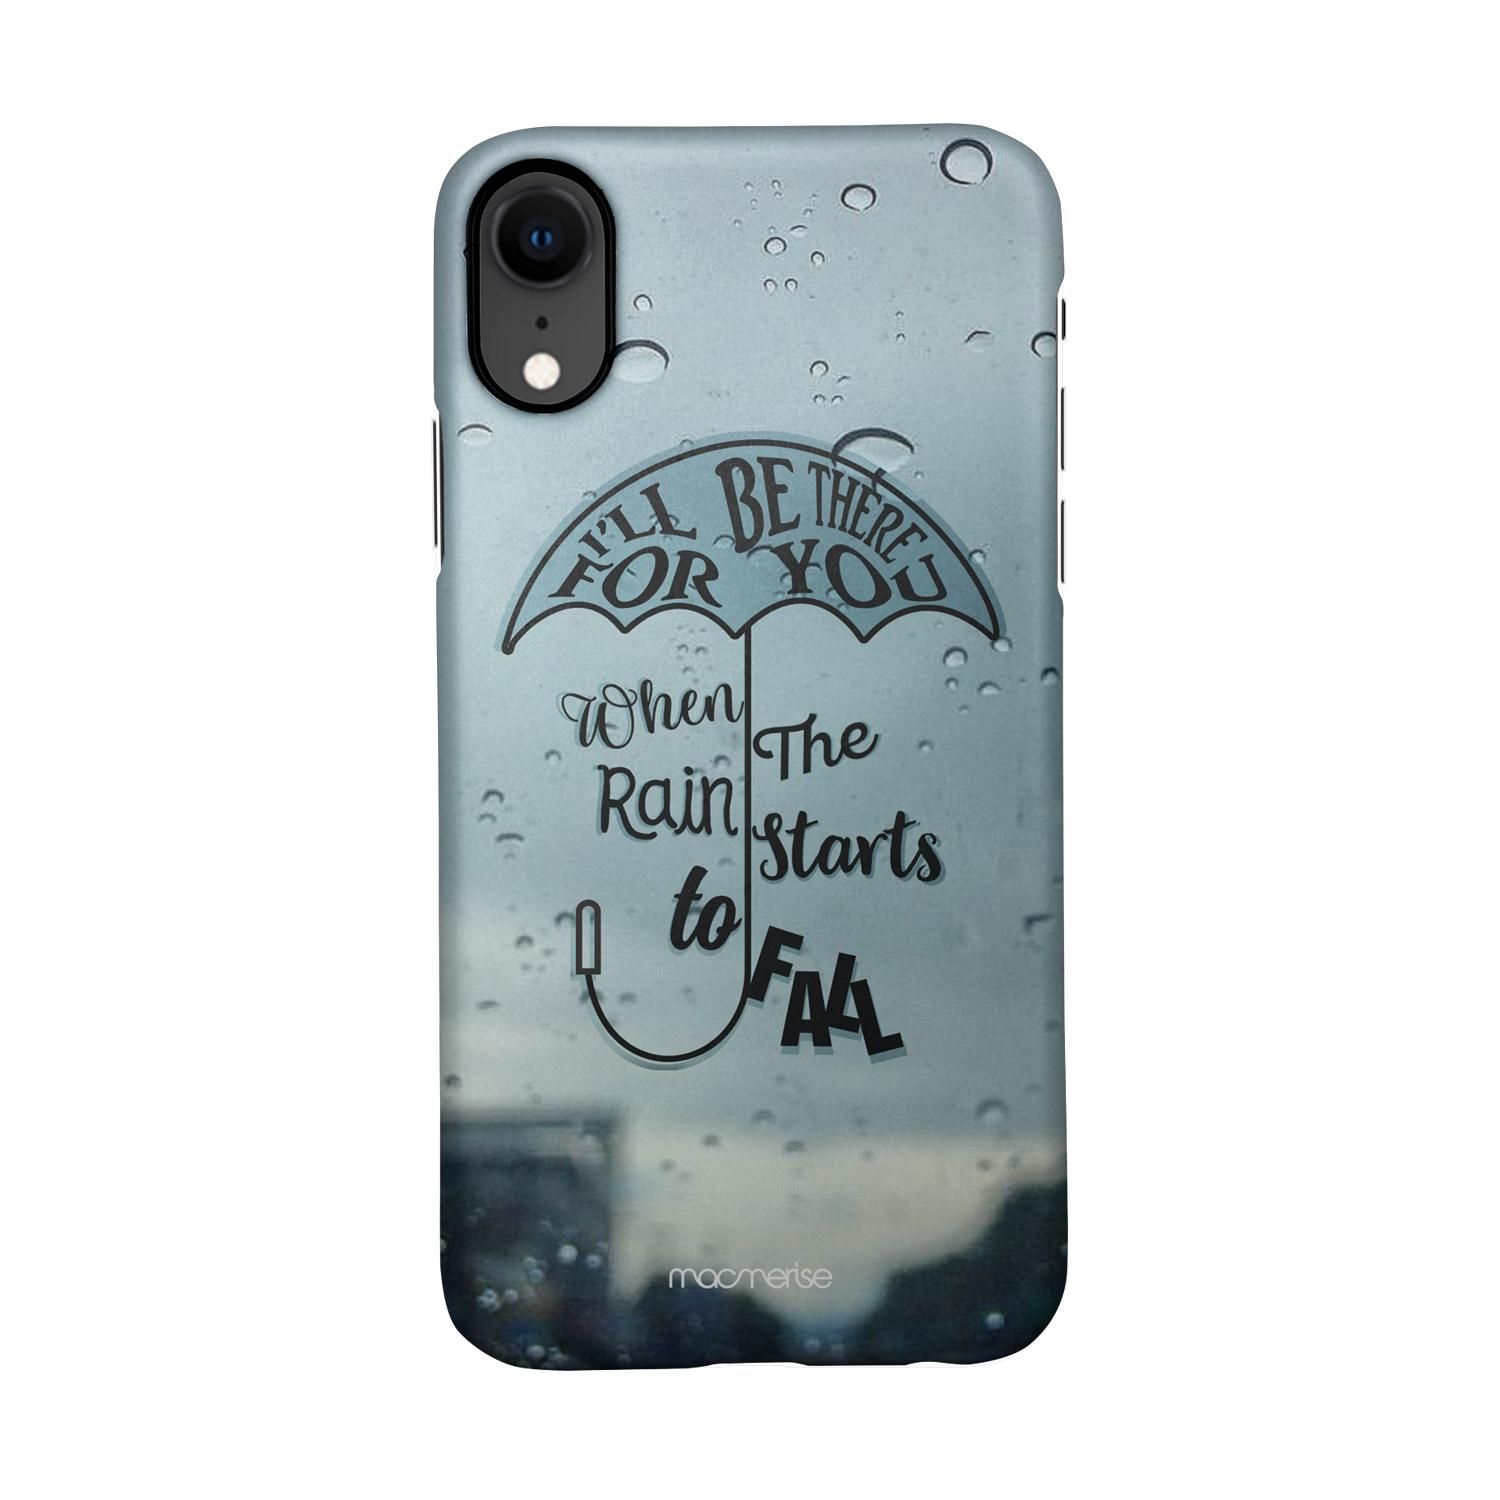 Buy Be There for You - Sleek Phone Case for iPhone XR Online